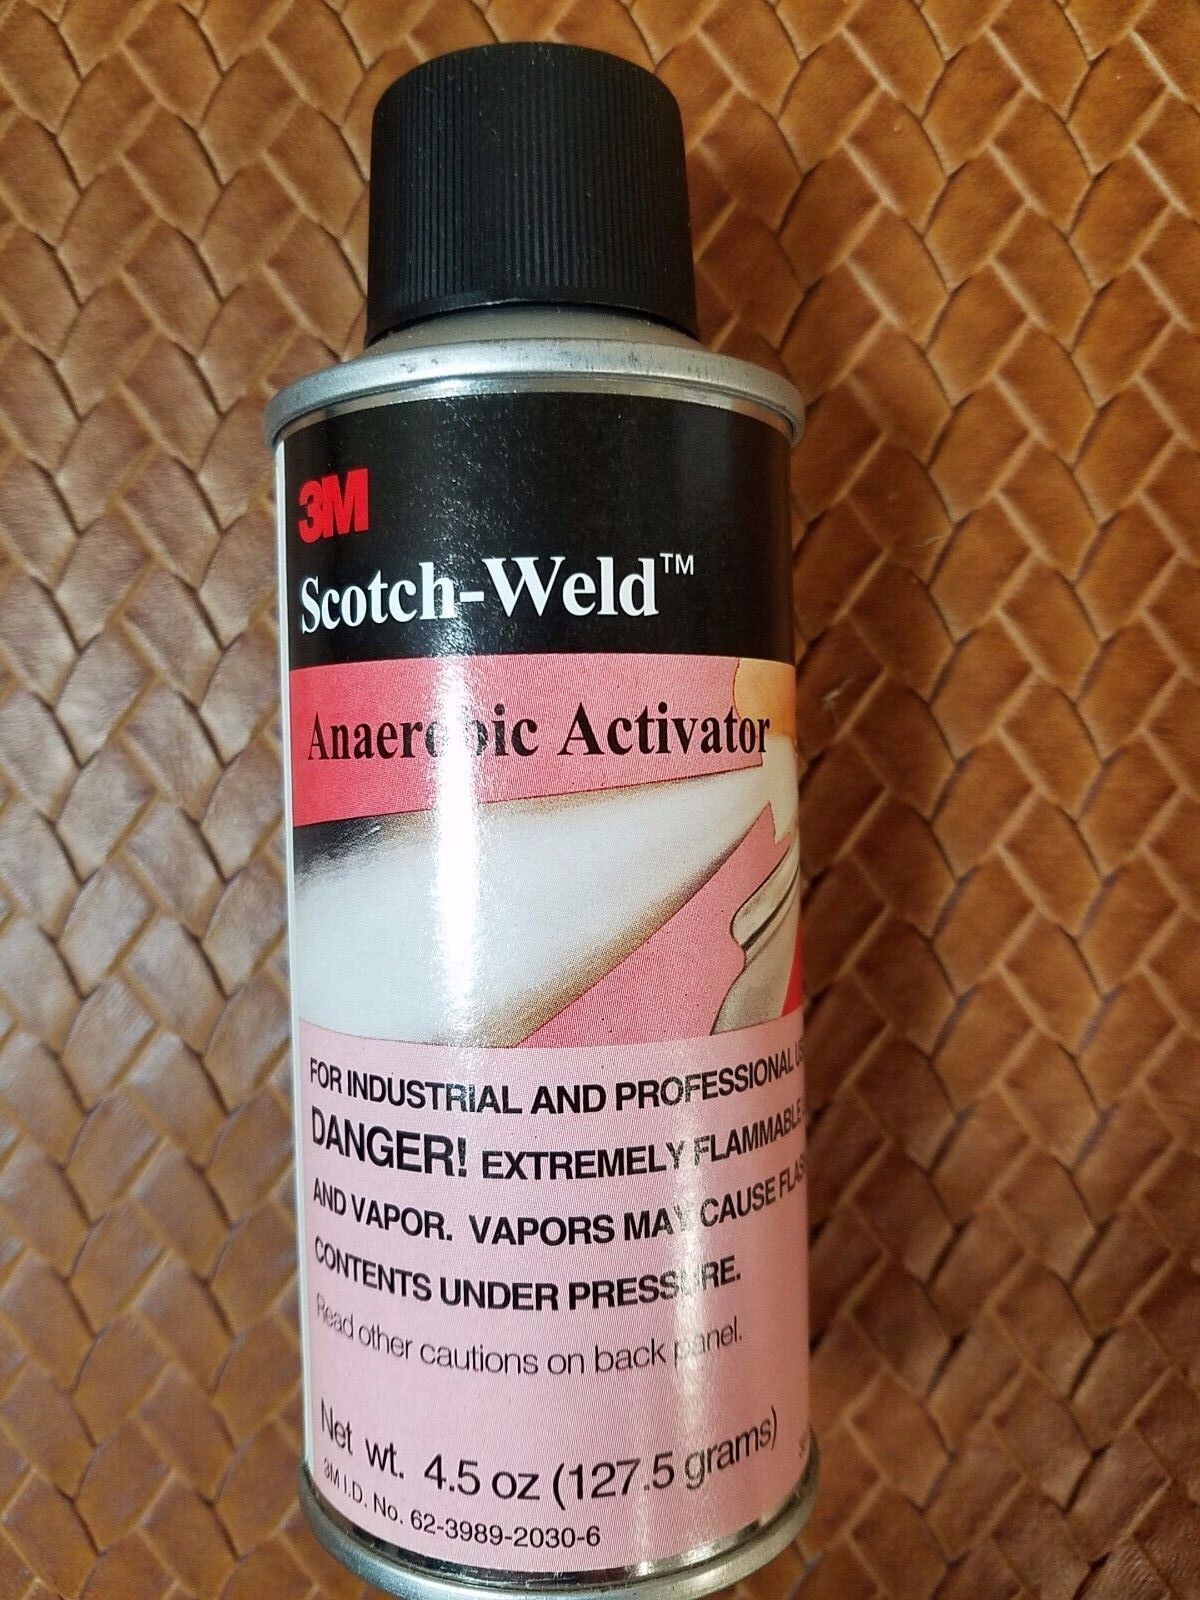 Anaerobic Activator 3M Scotch-Weld Max 61% OFF 3989 can oz 4.5 1 Ranking TOP3 #57395